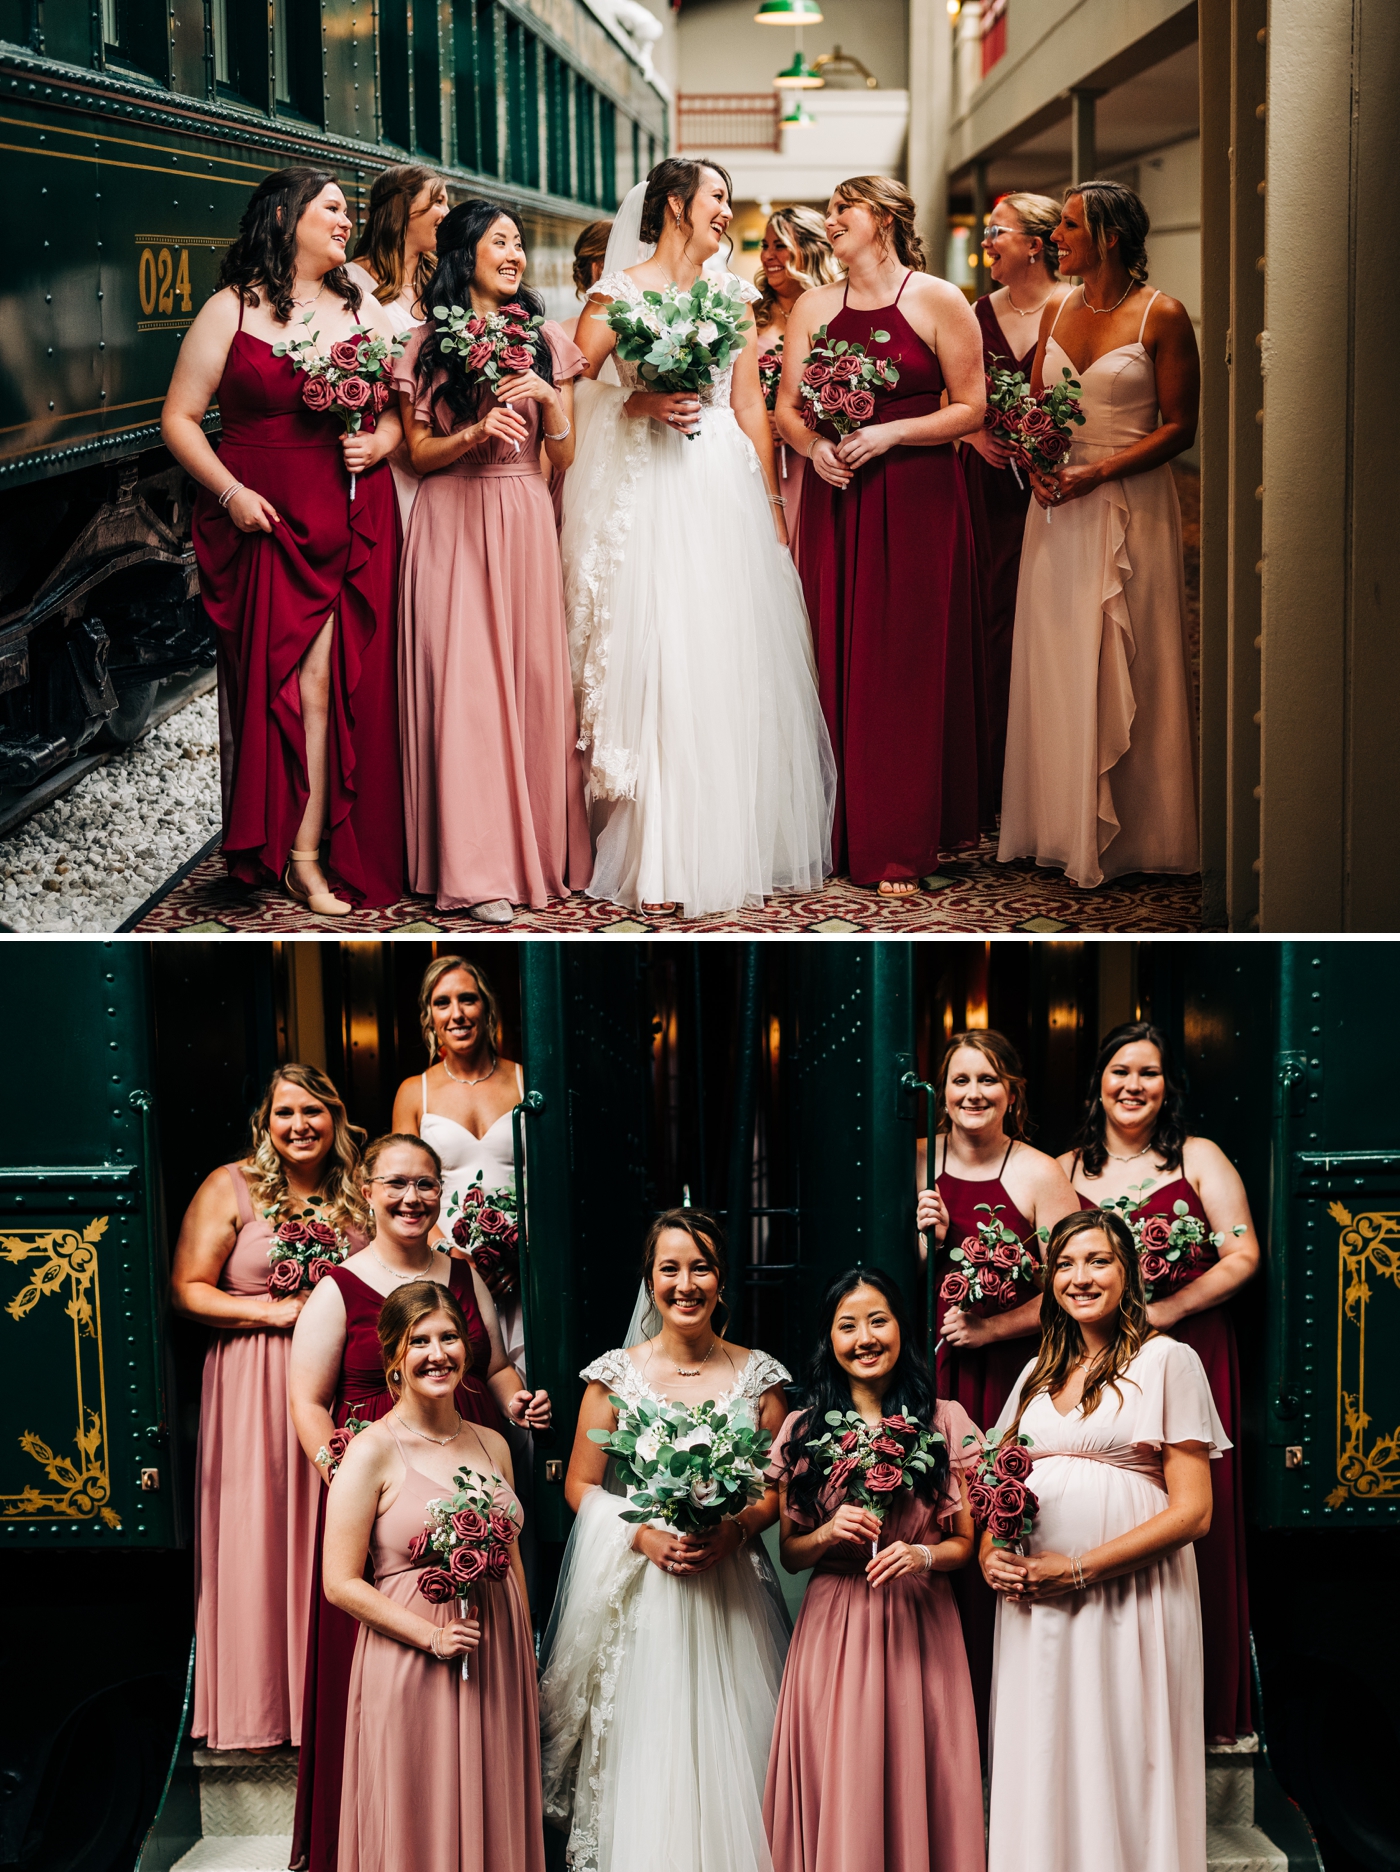 Blush and maroon bridesmaids dresses for wedding at Union Station